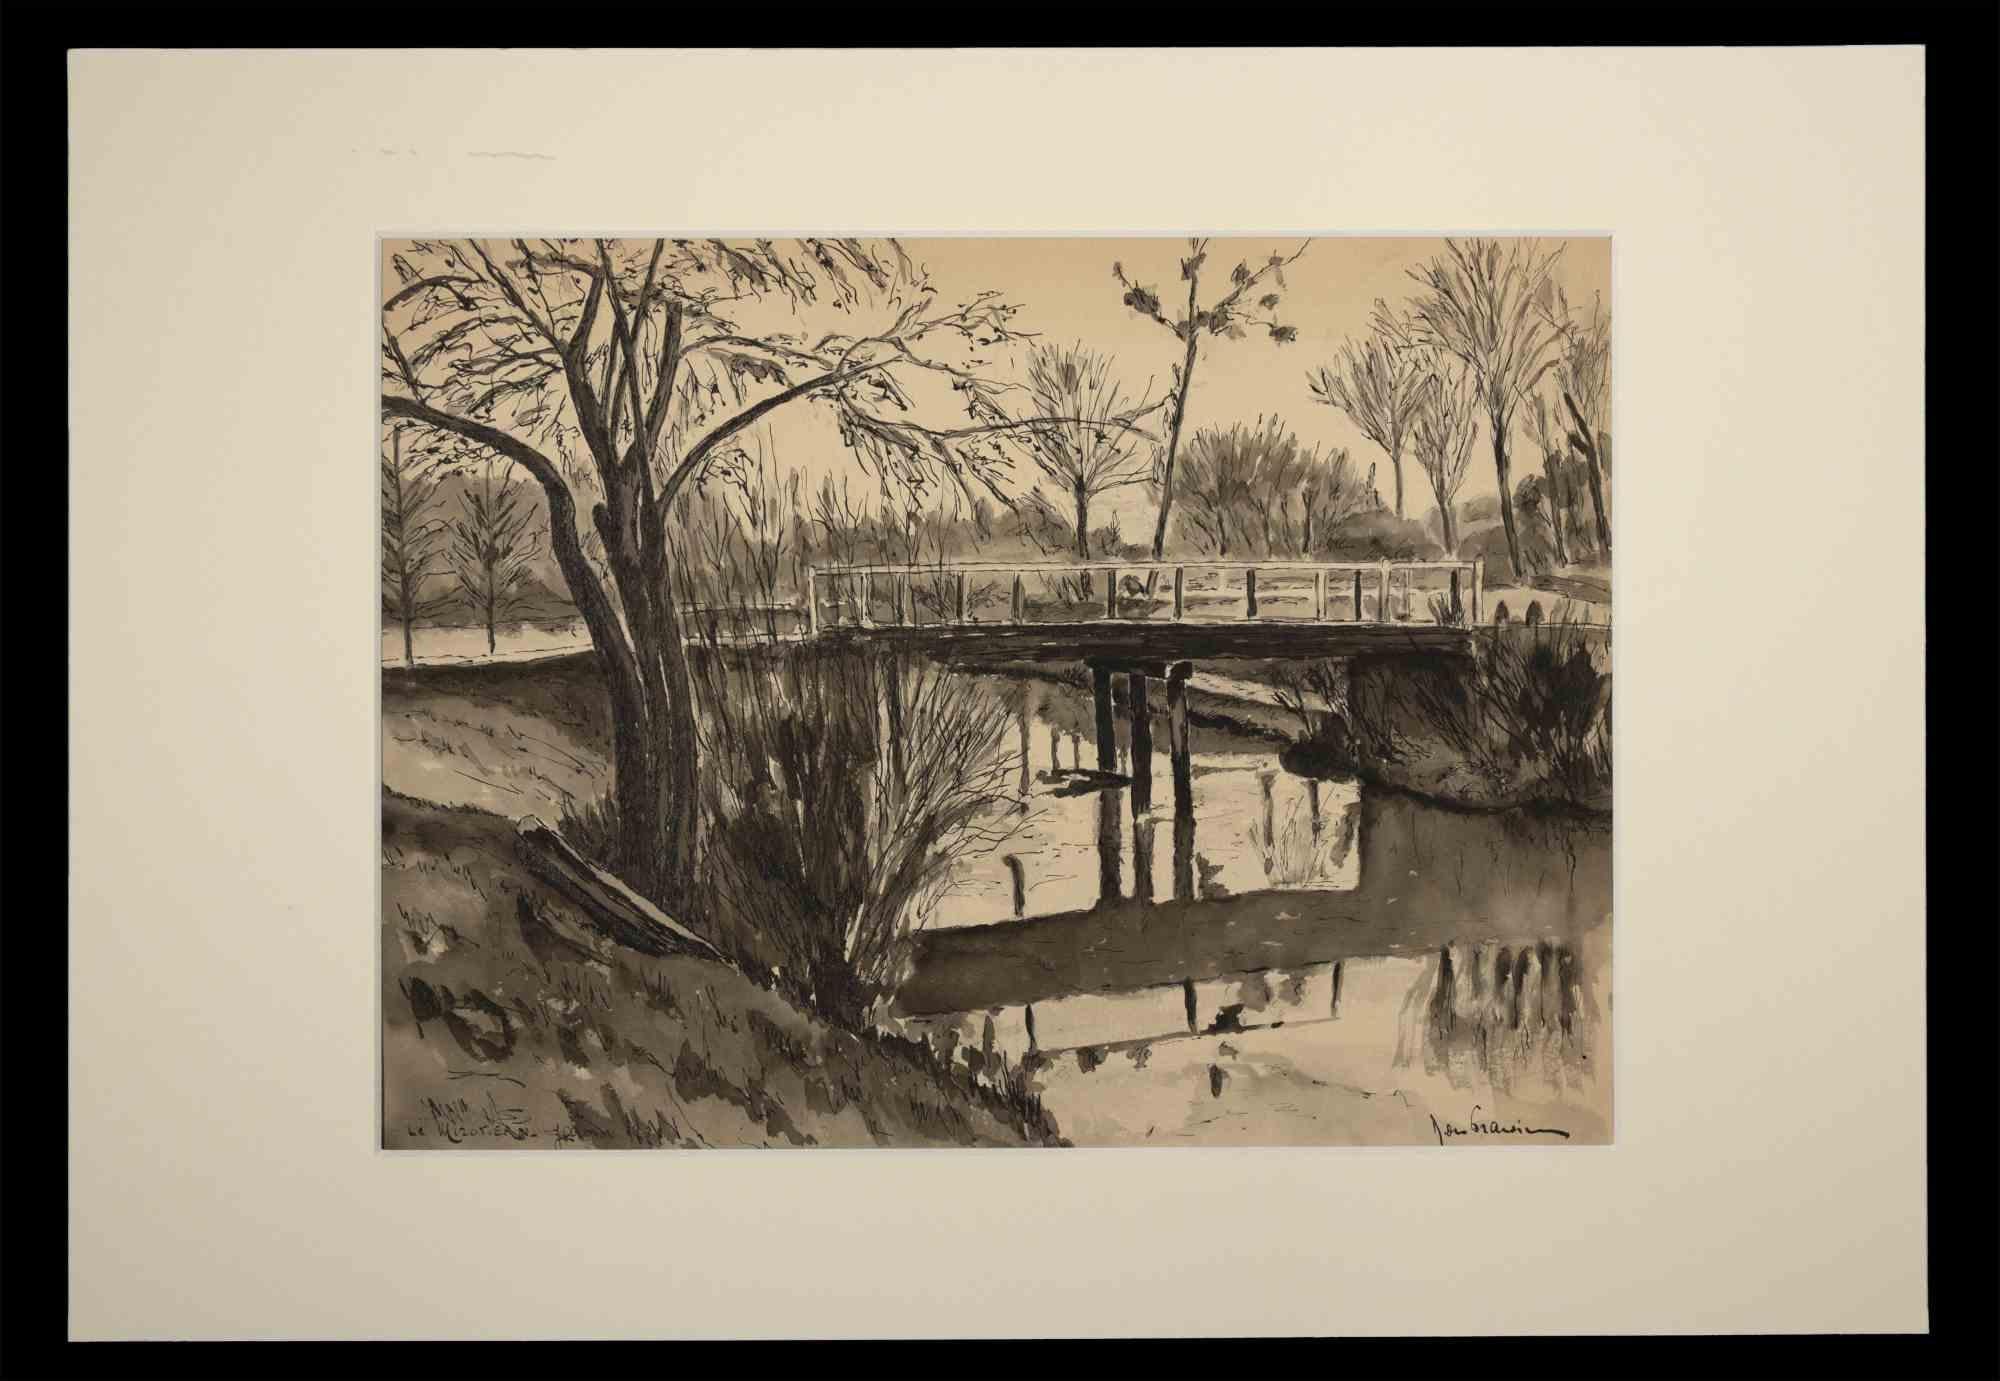 Unknown Landscape Art - Landscape in France - Original Drawing - Mid-20th Century